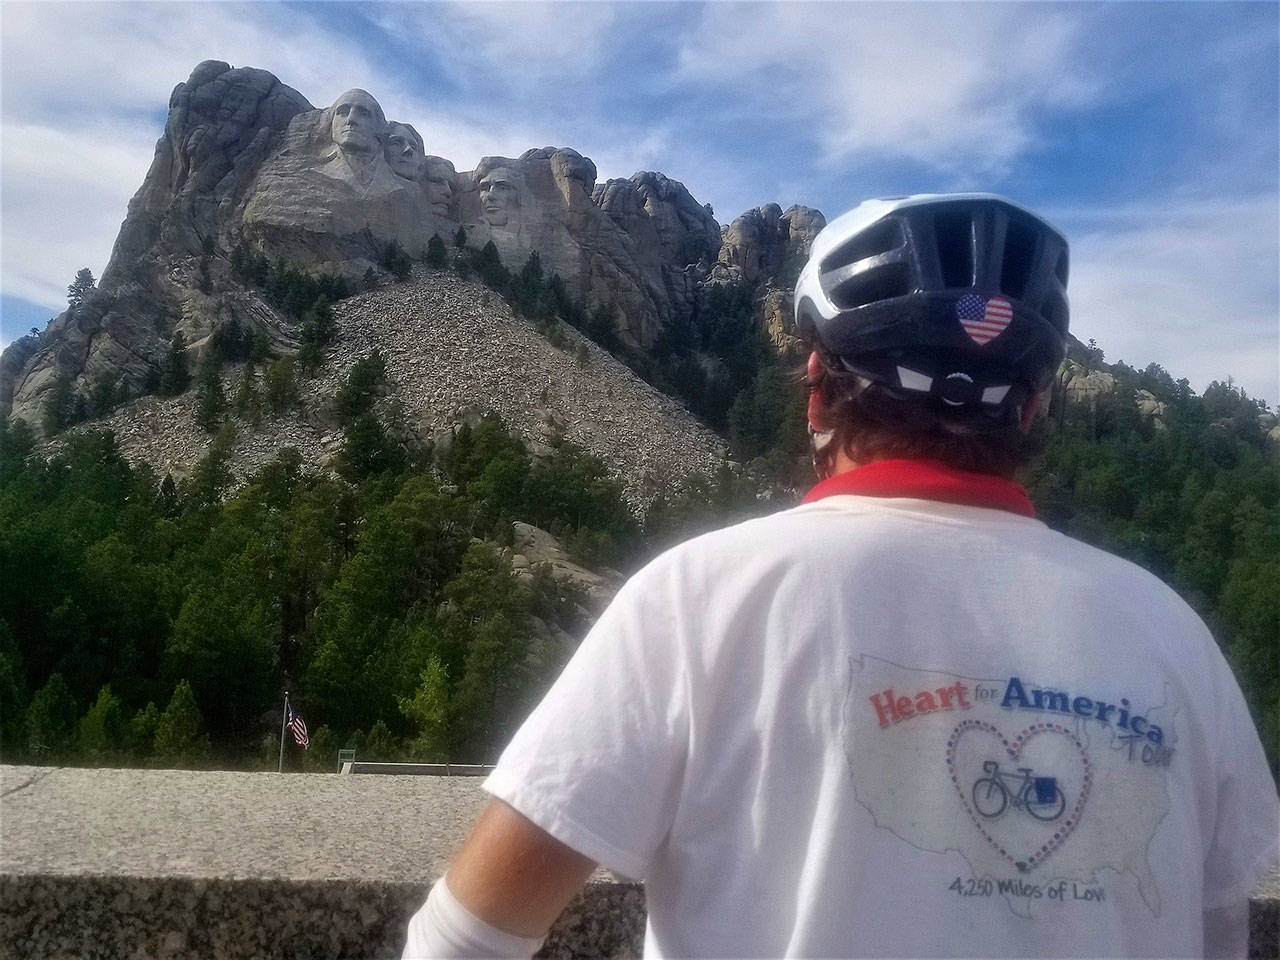 Kirk Gillock launches his “Heart for America” campaign where he cycled across 13 states in the shape of a heart. Photo courtesy of Kirk Gillock.